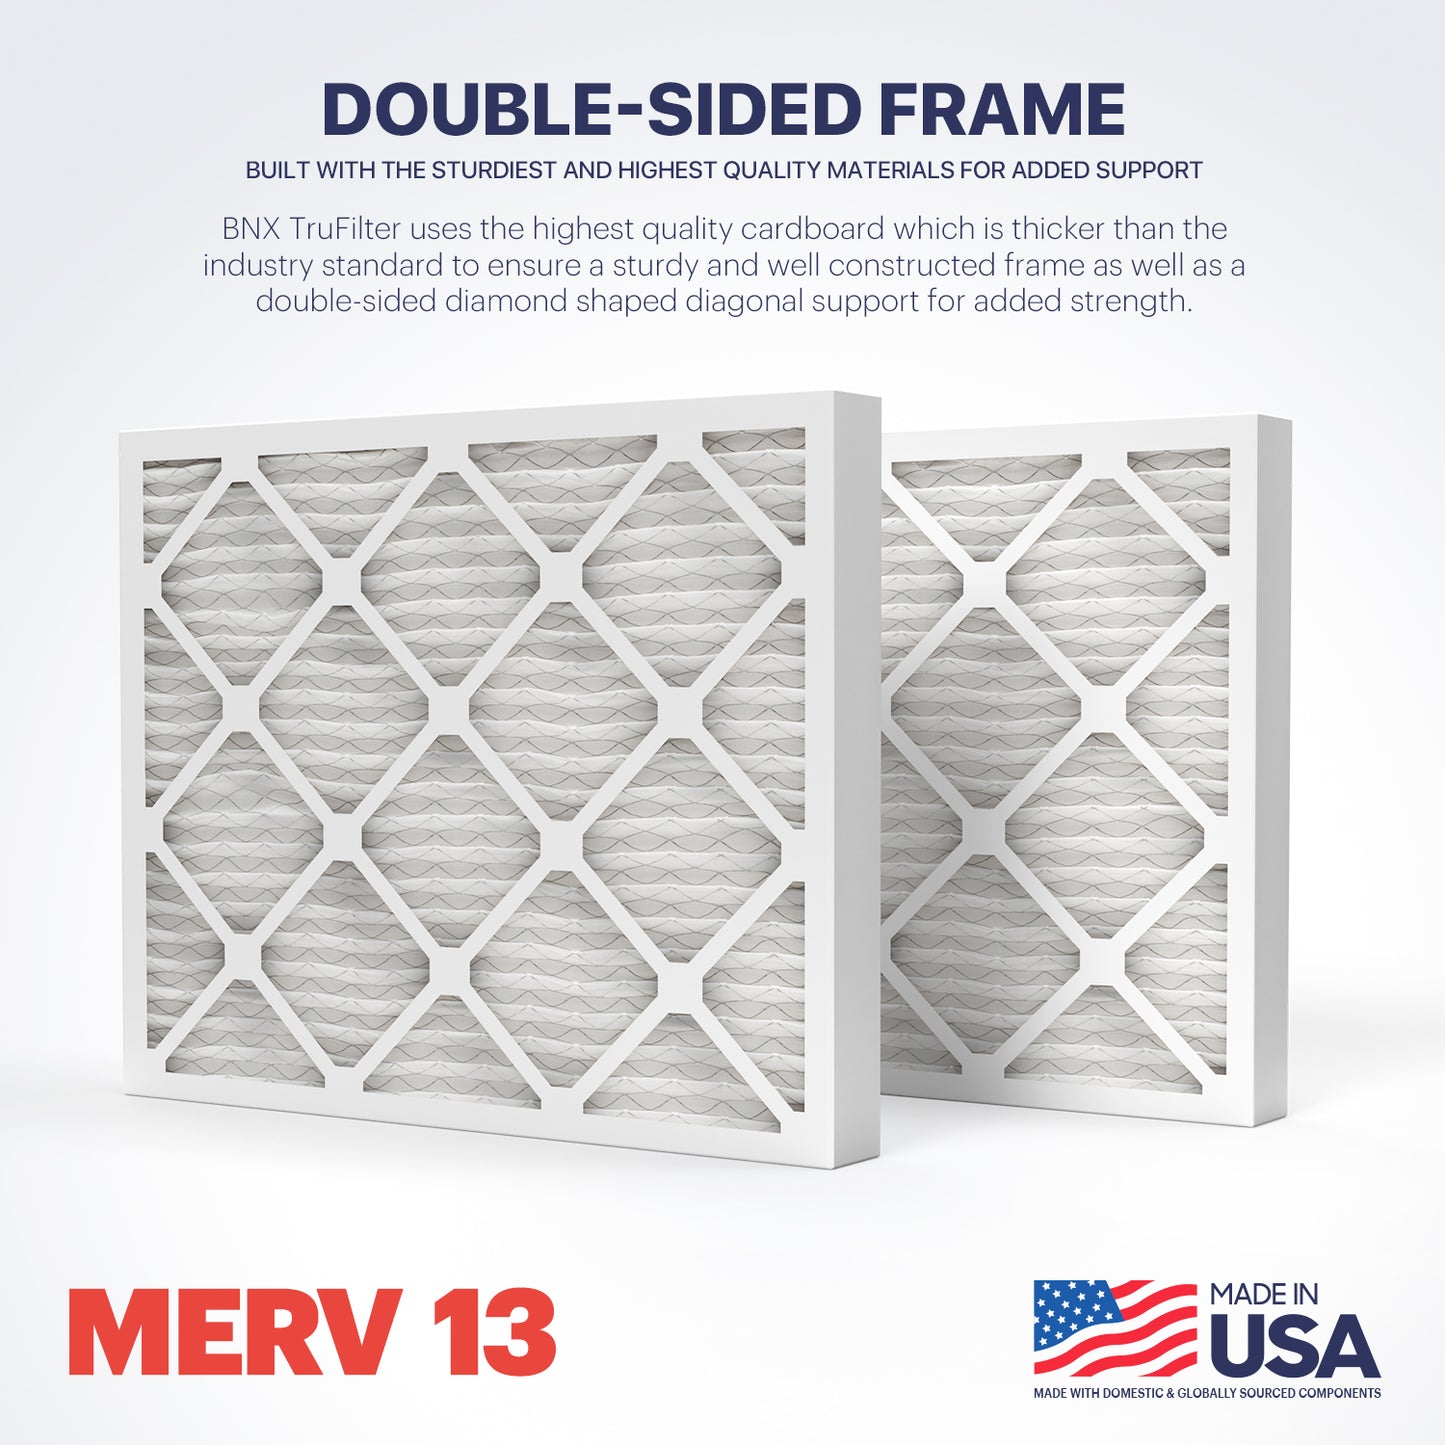 BNX TruFilter 16x25x2 MERV 13 Pleated Air Filter – Made in USA (4-Pack)